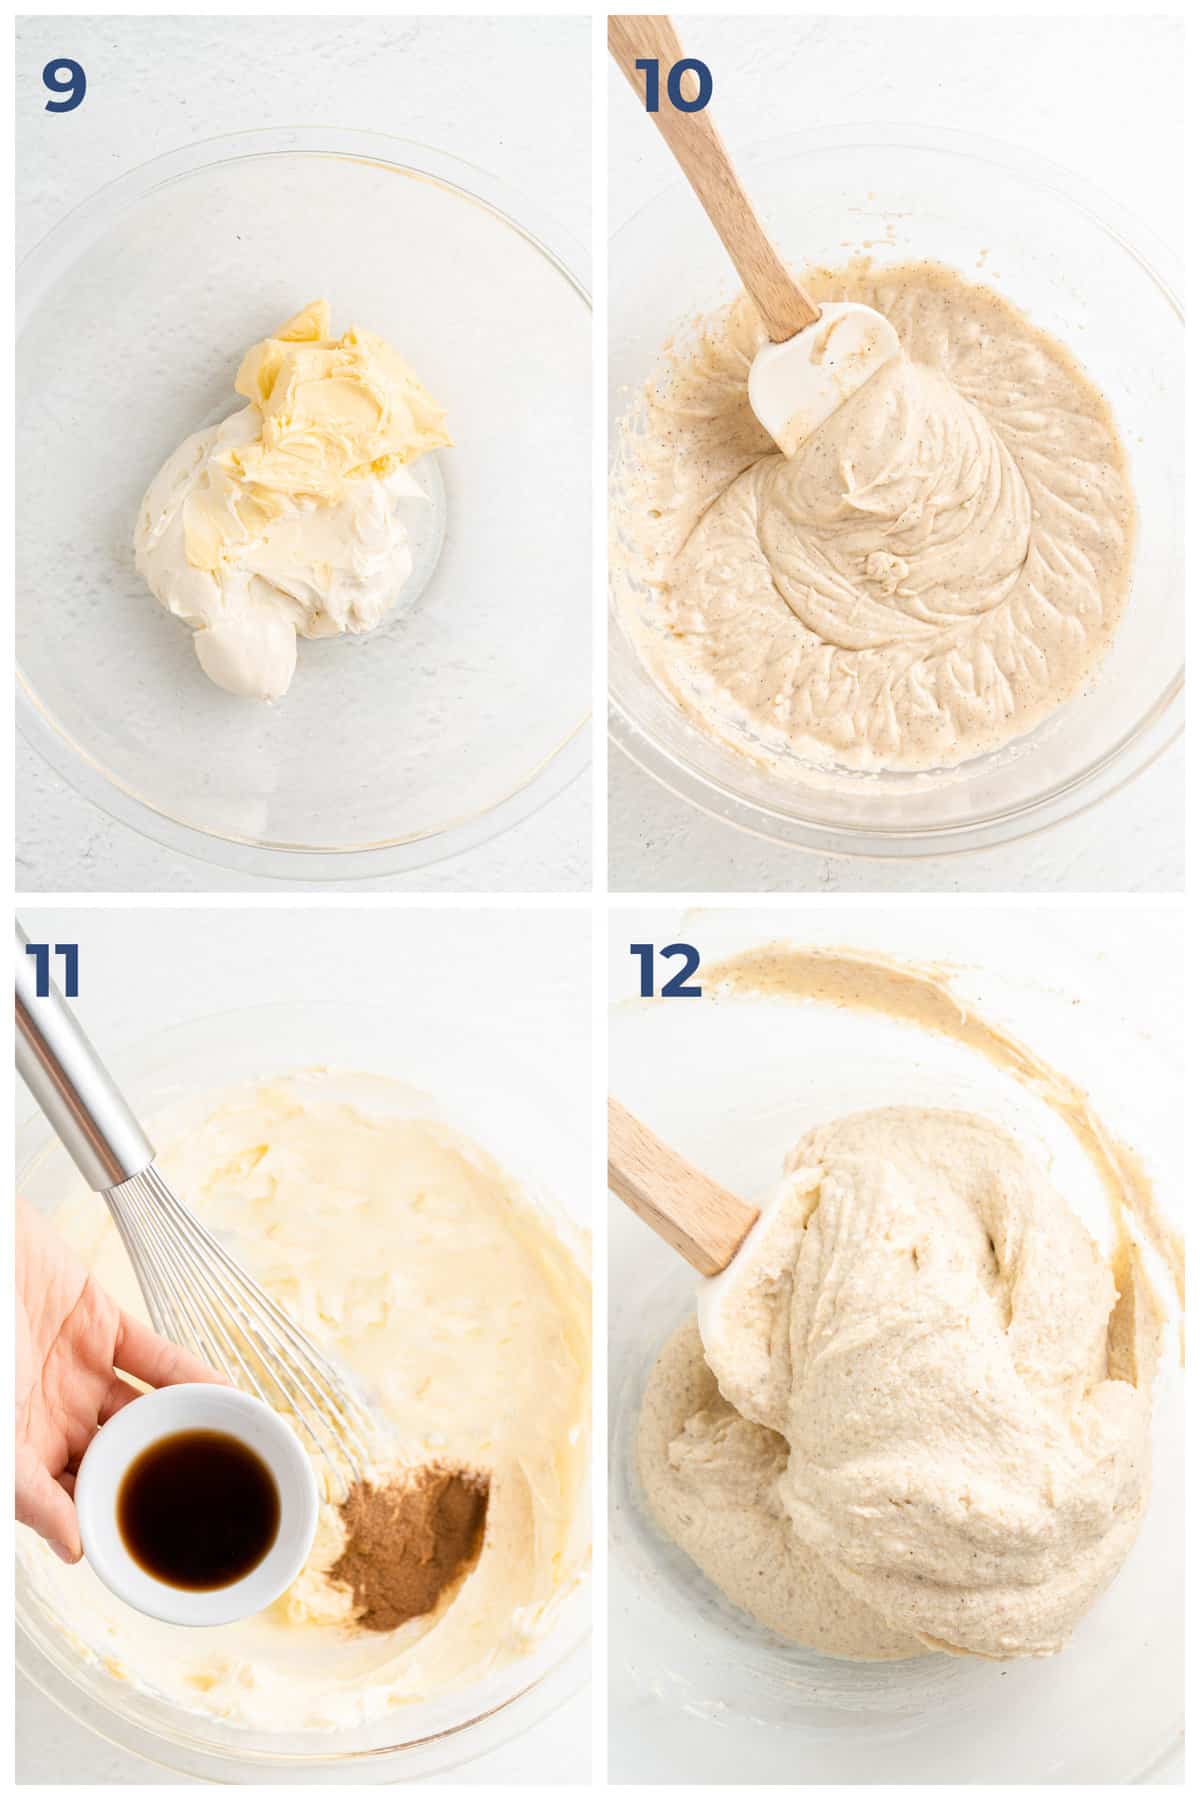 Step by step instructions for how to make keto pumpkin cupcakes with cream cheese frosting.